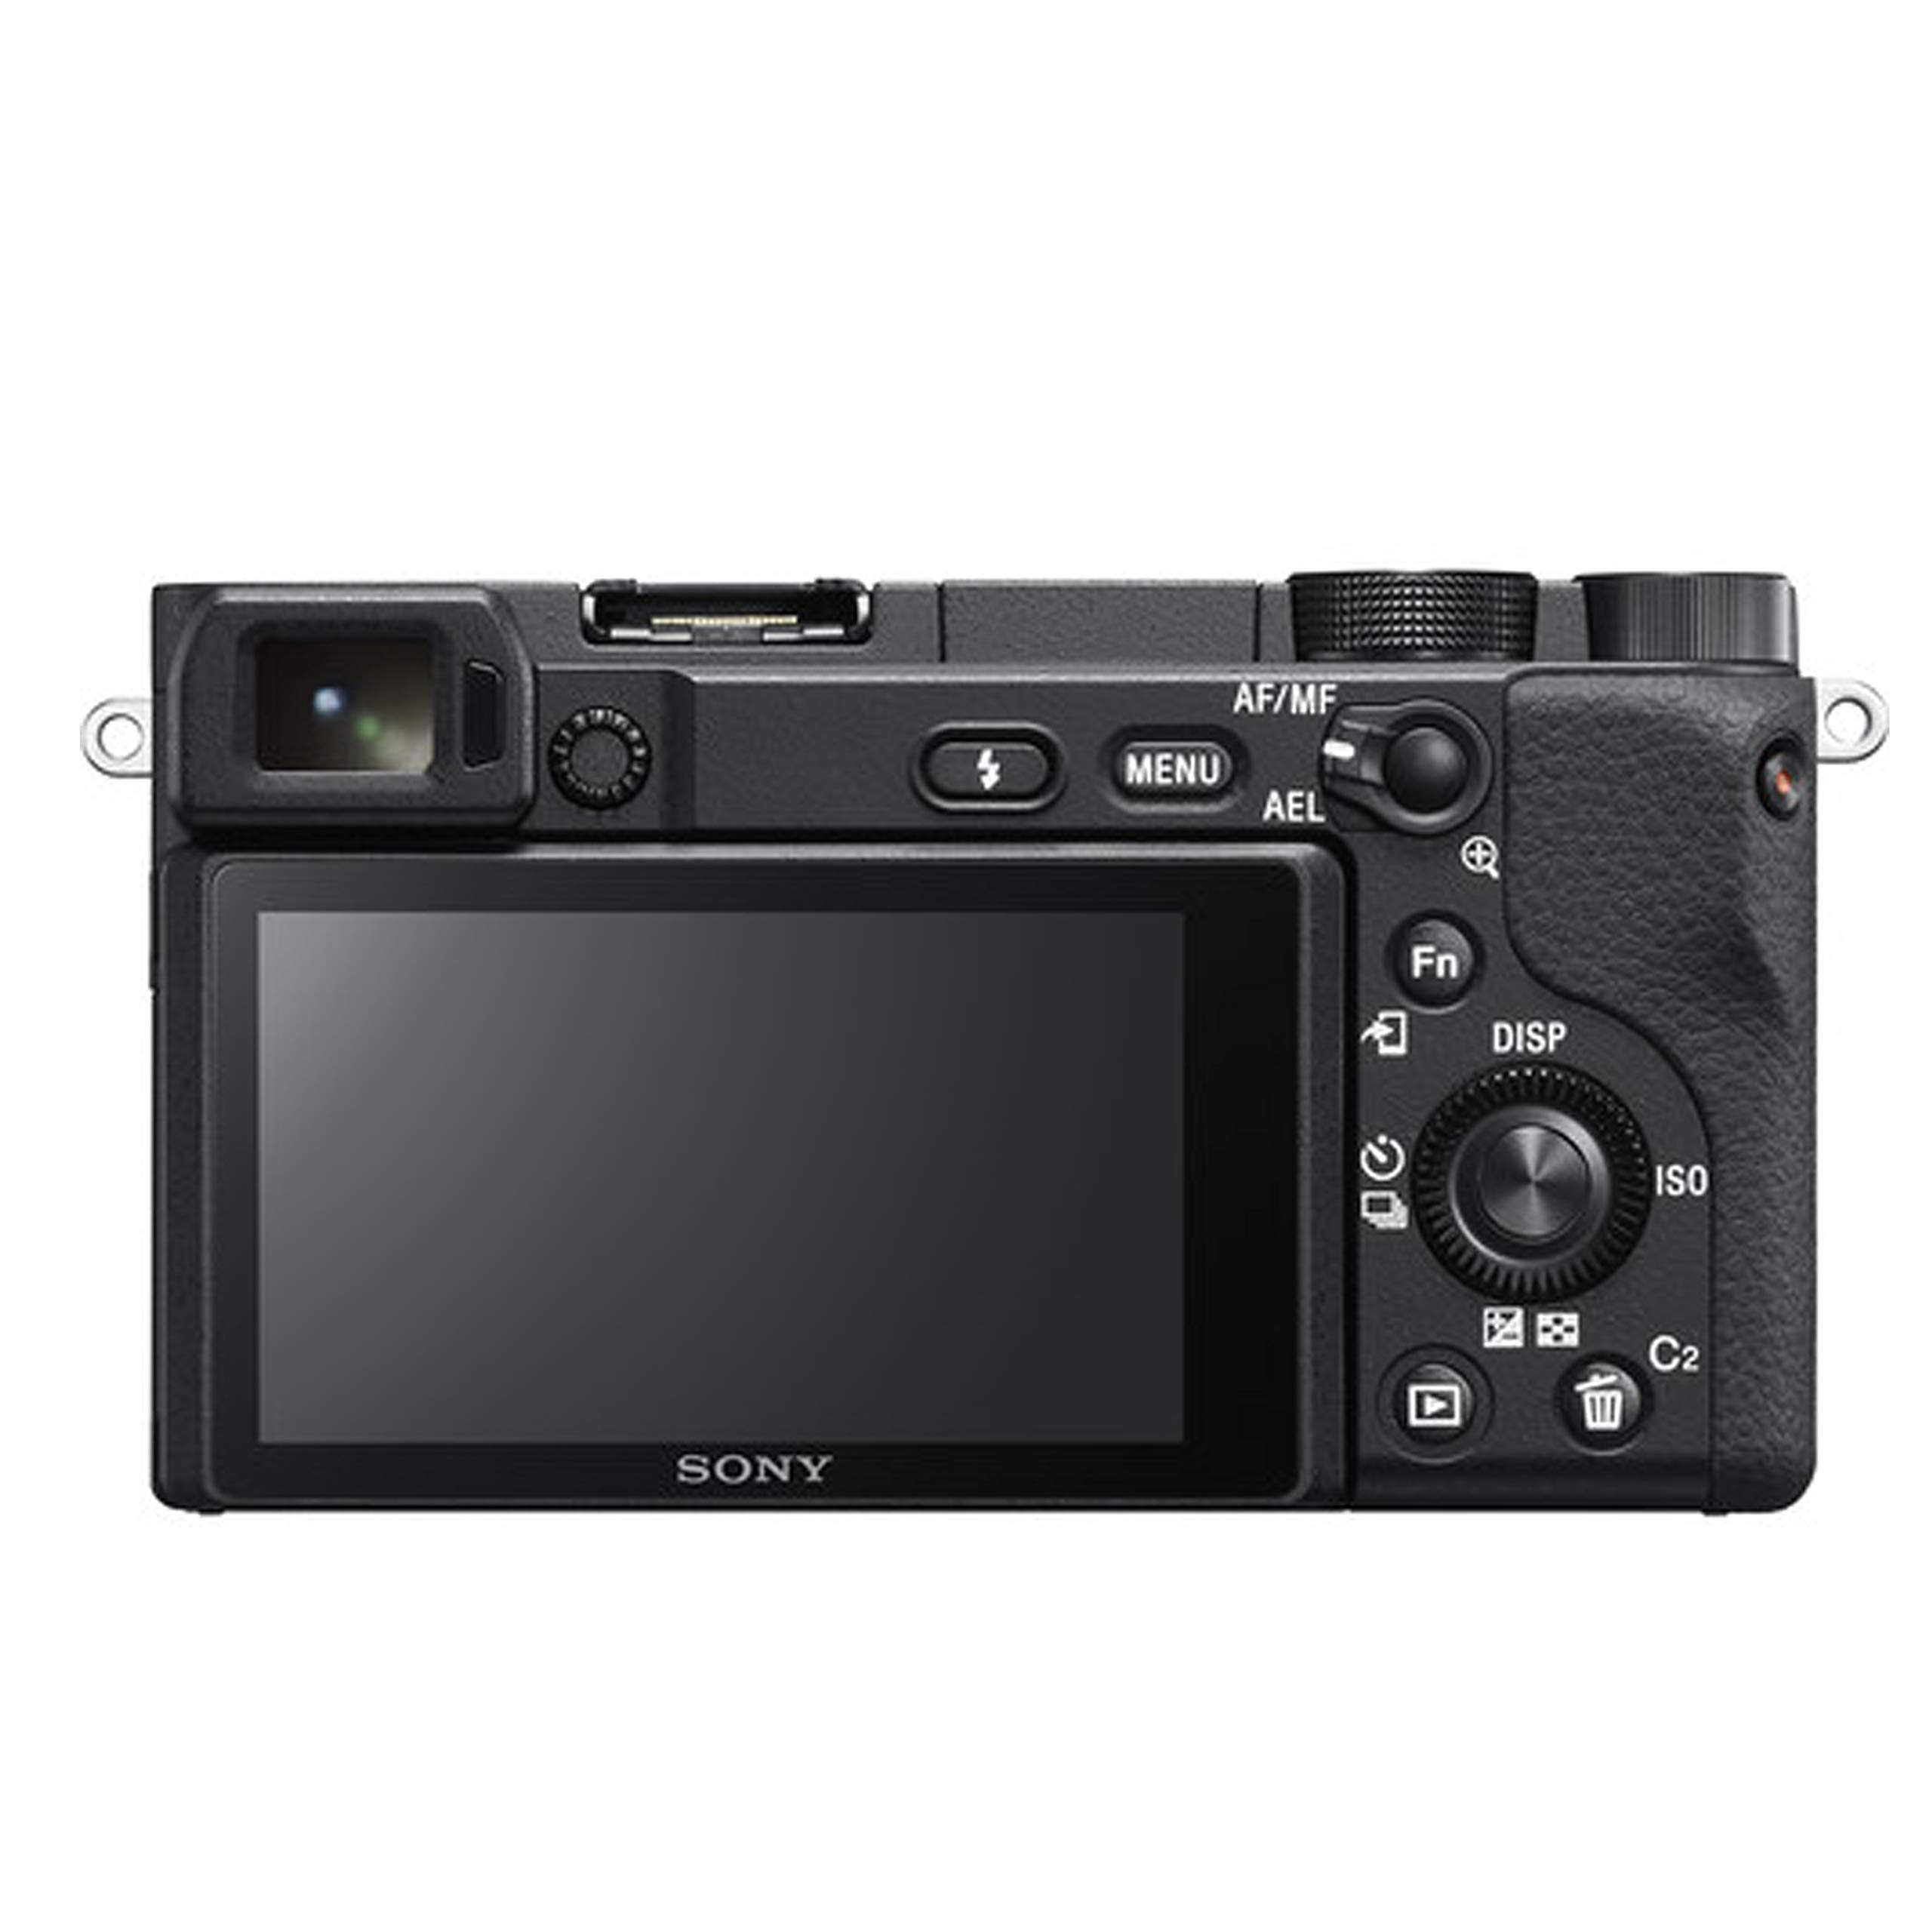 Sony Alpha a6400 Mirrorless Digital Camera 24.2MP w/ 18-135mm Lens ILCE-6400M/B + Spare Battery + SanDisk 64GB Extreme PRO SDXC UHS-I / V30 / U3 / Class 10, 170 MB/s Memory Card + More (28PC Bundle)